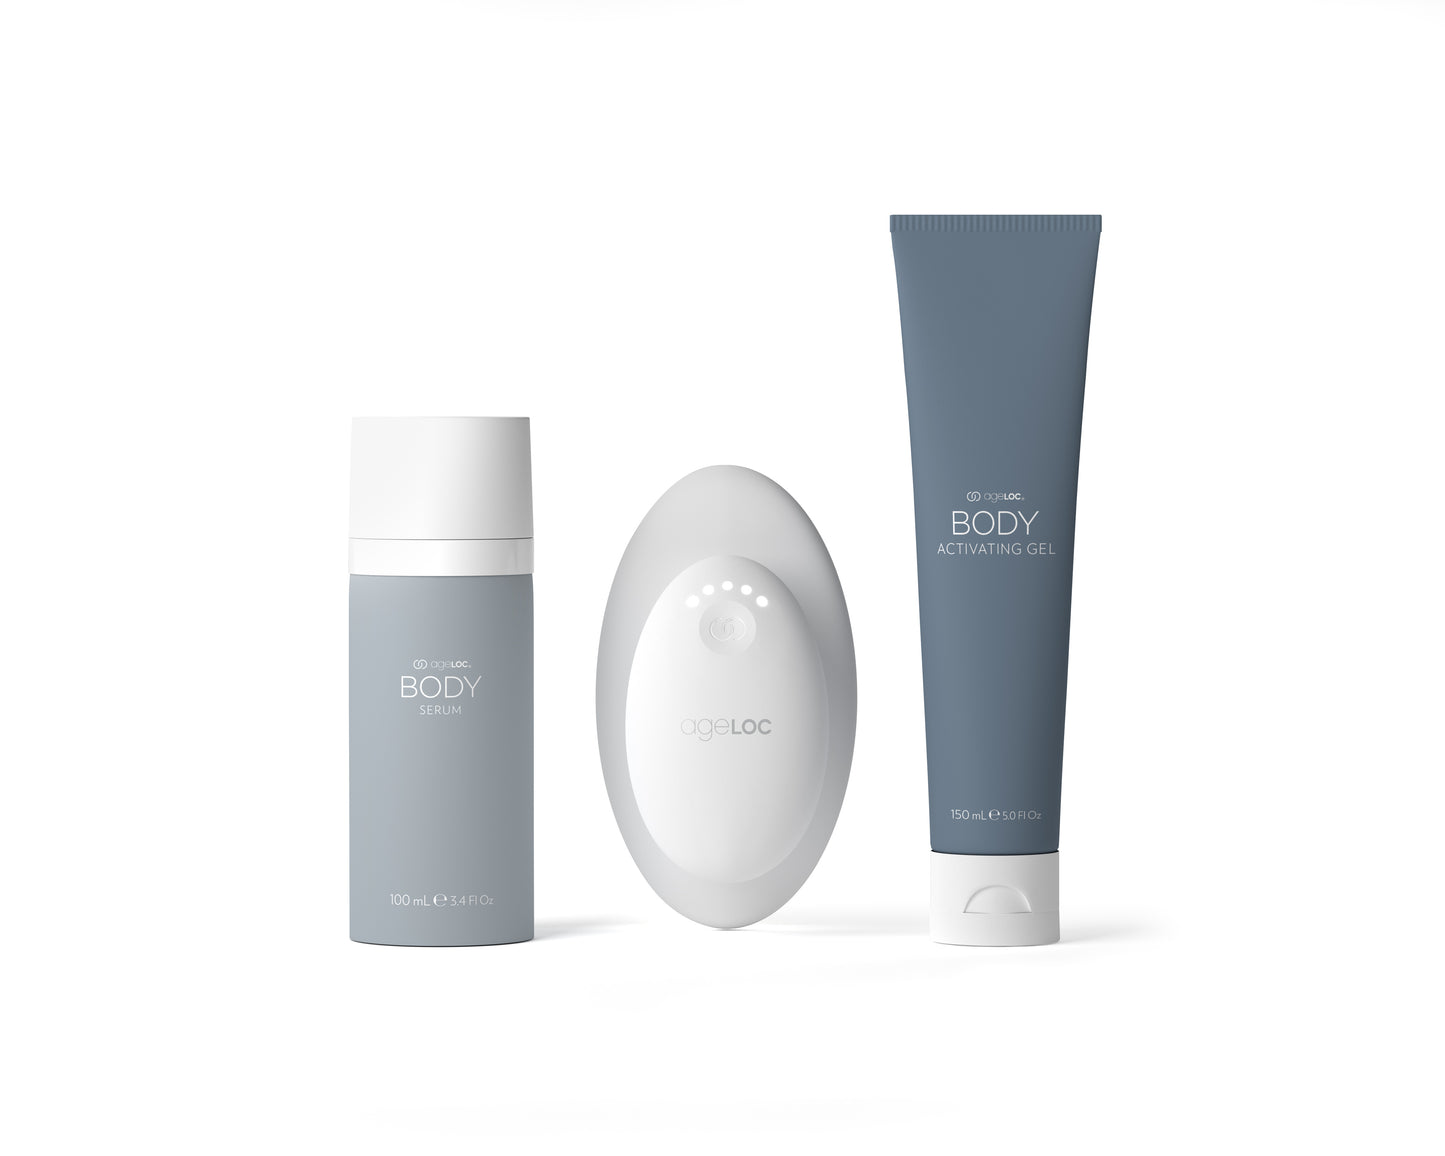 ageLOC WellSpa iO Essential System on sale for less